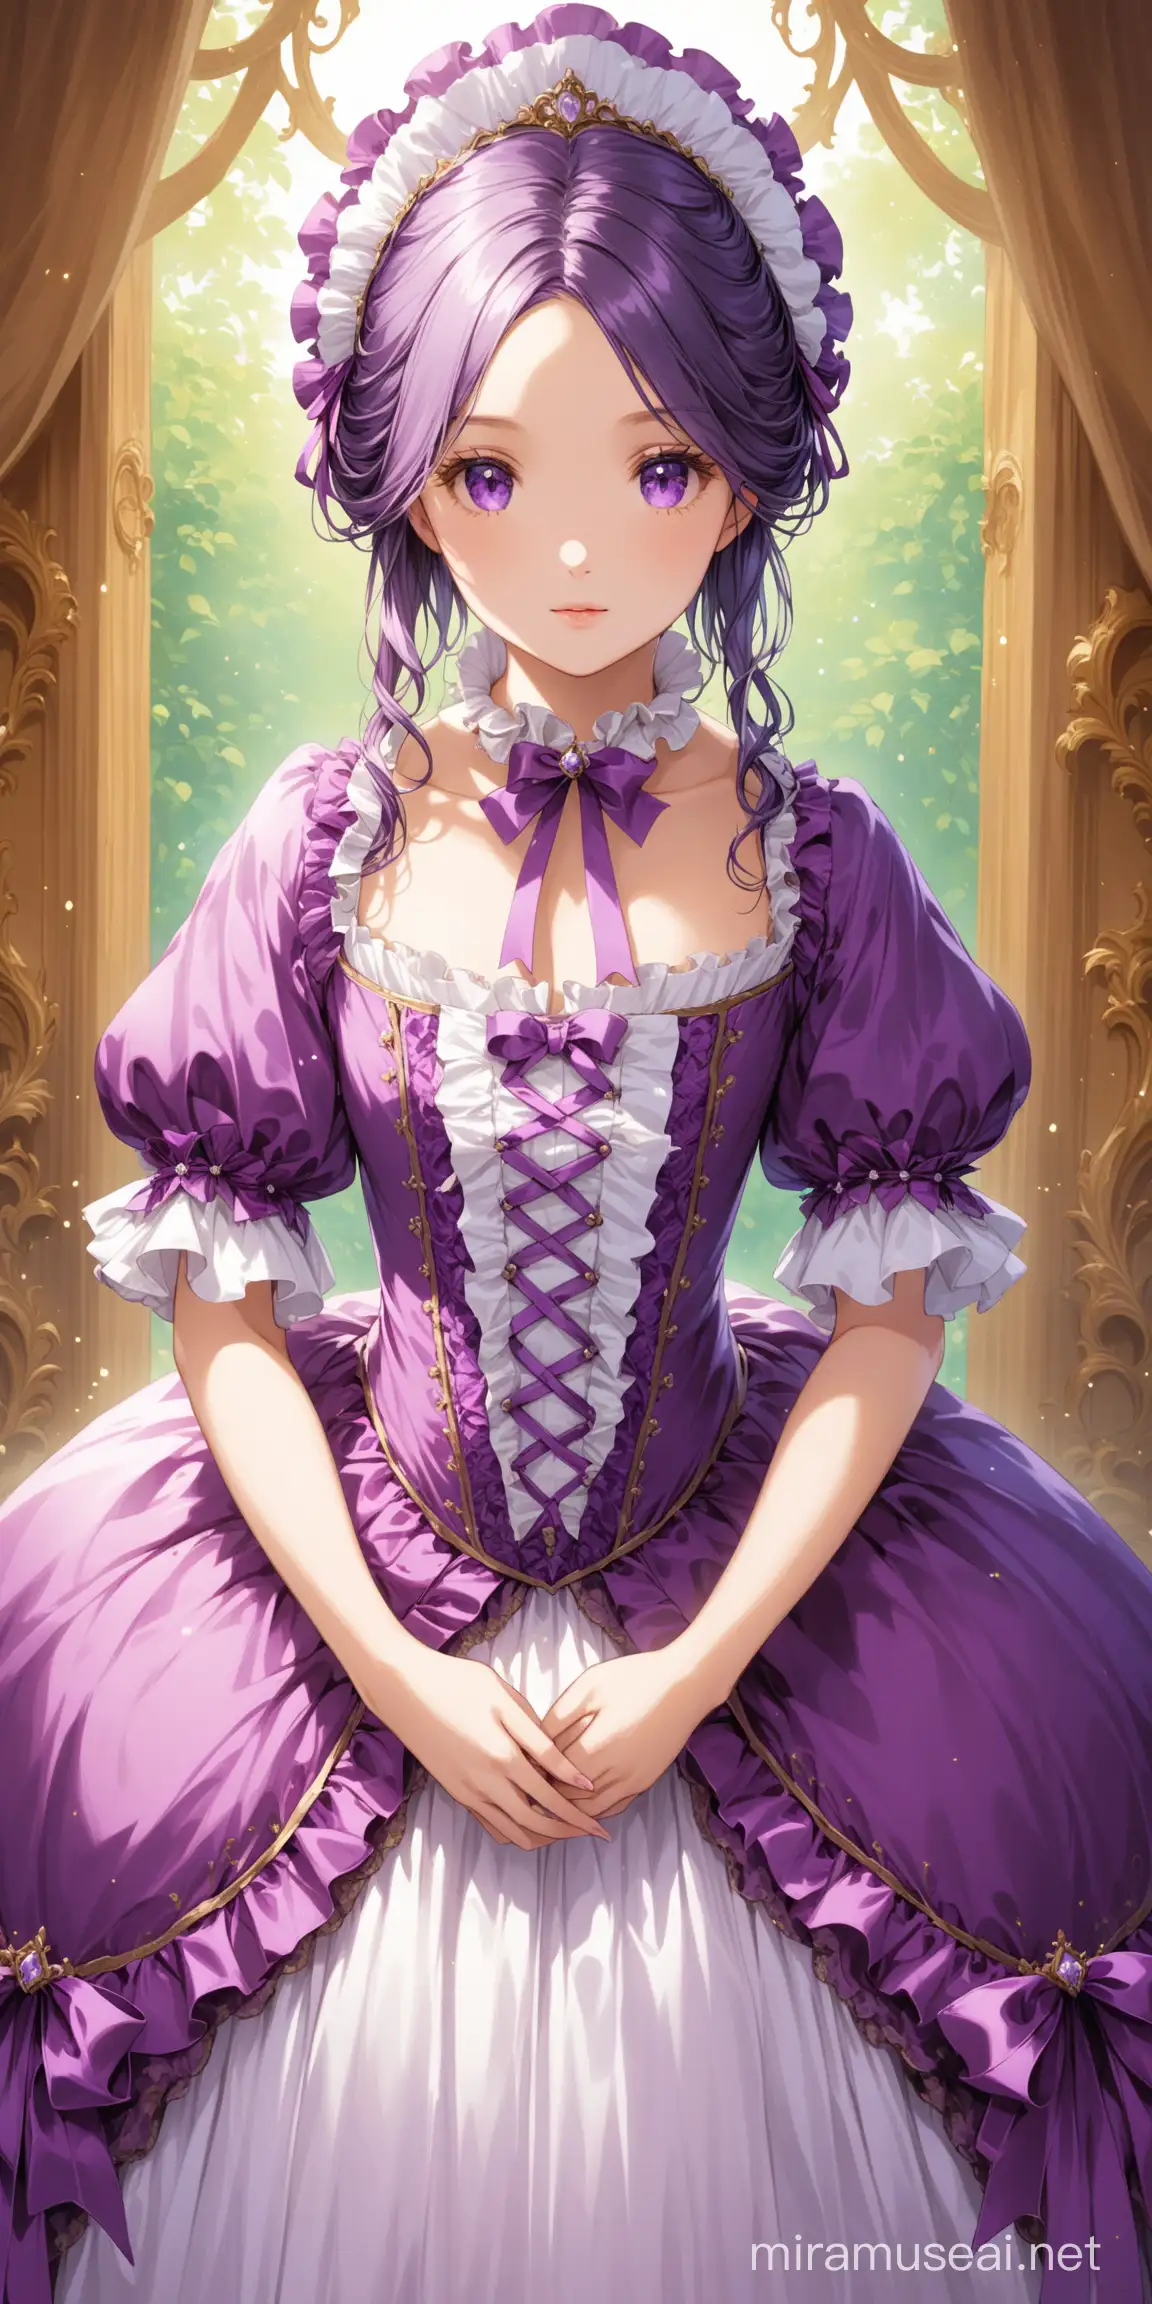 Girl in purple rococo dress, front facing, looking into the camera,